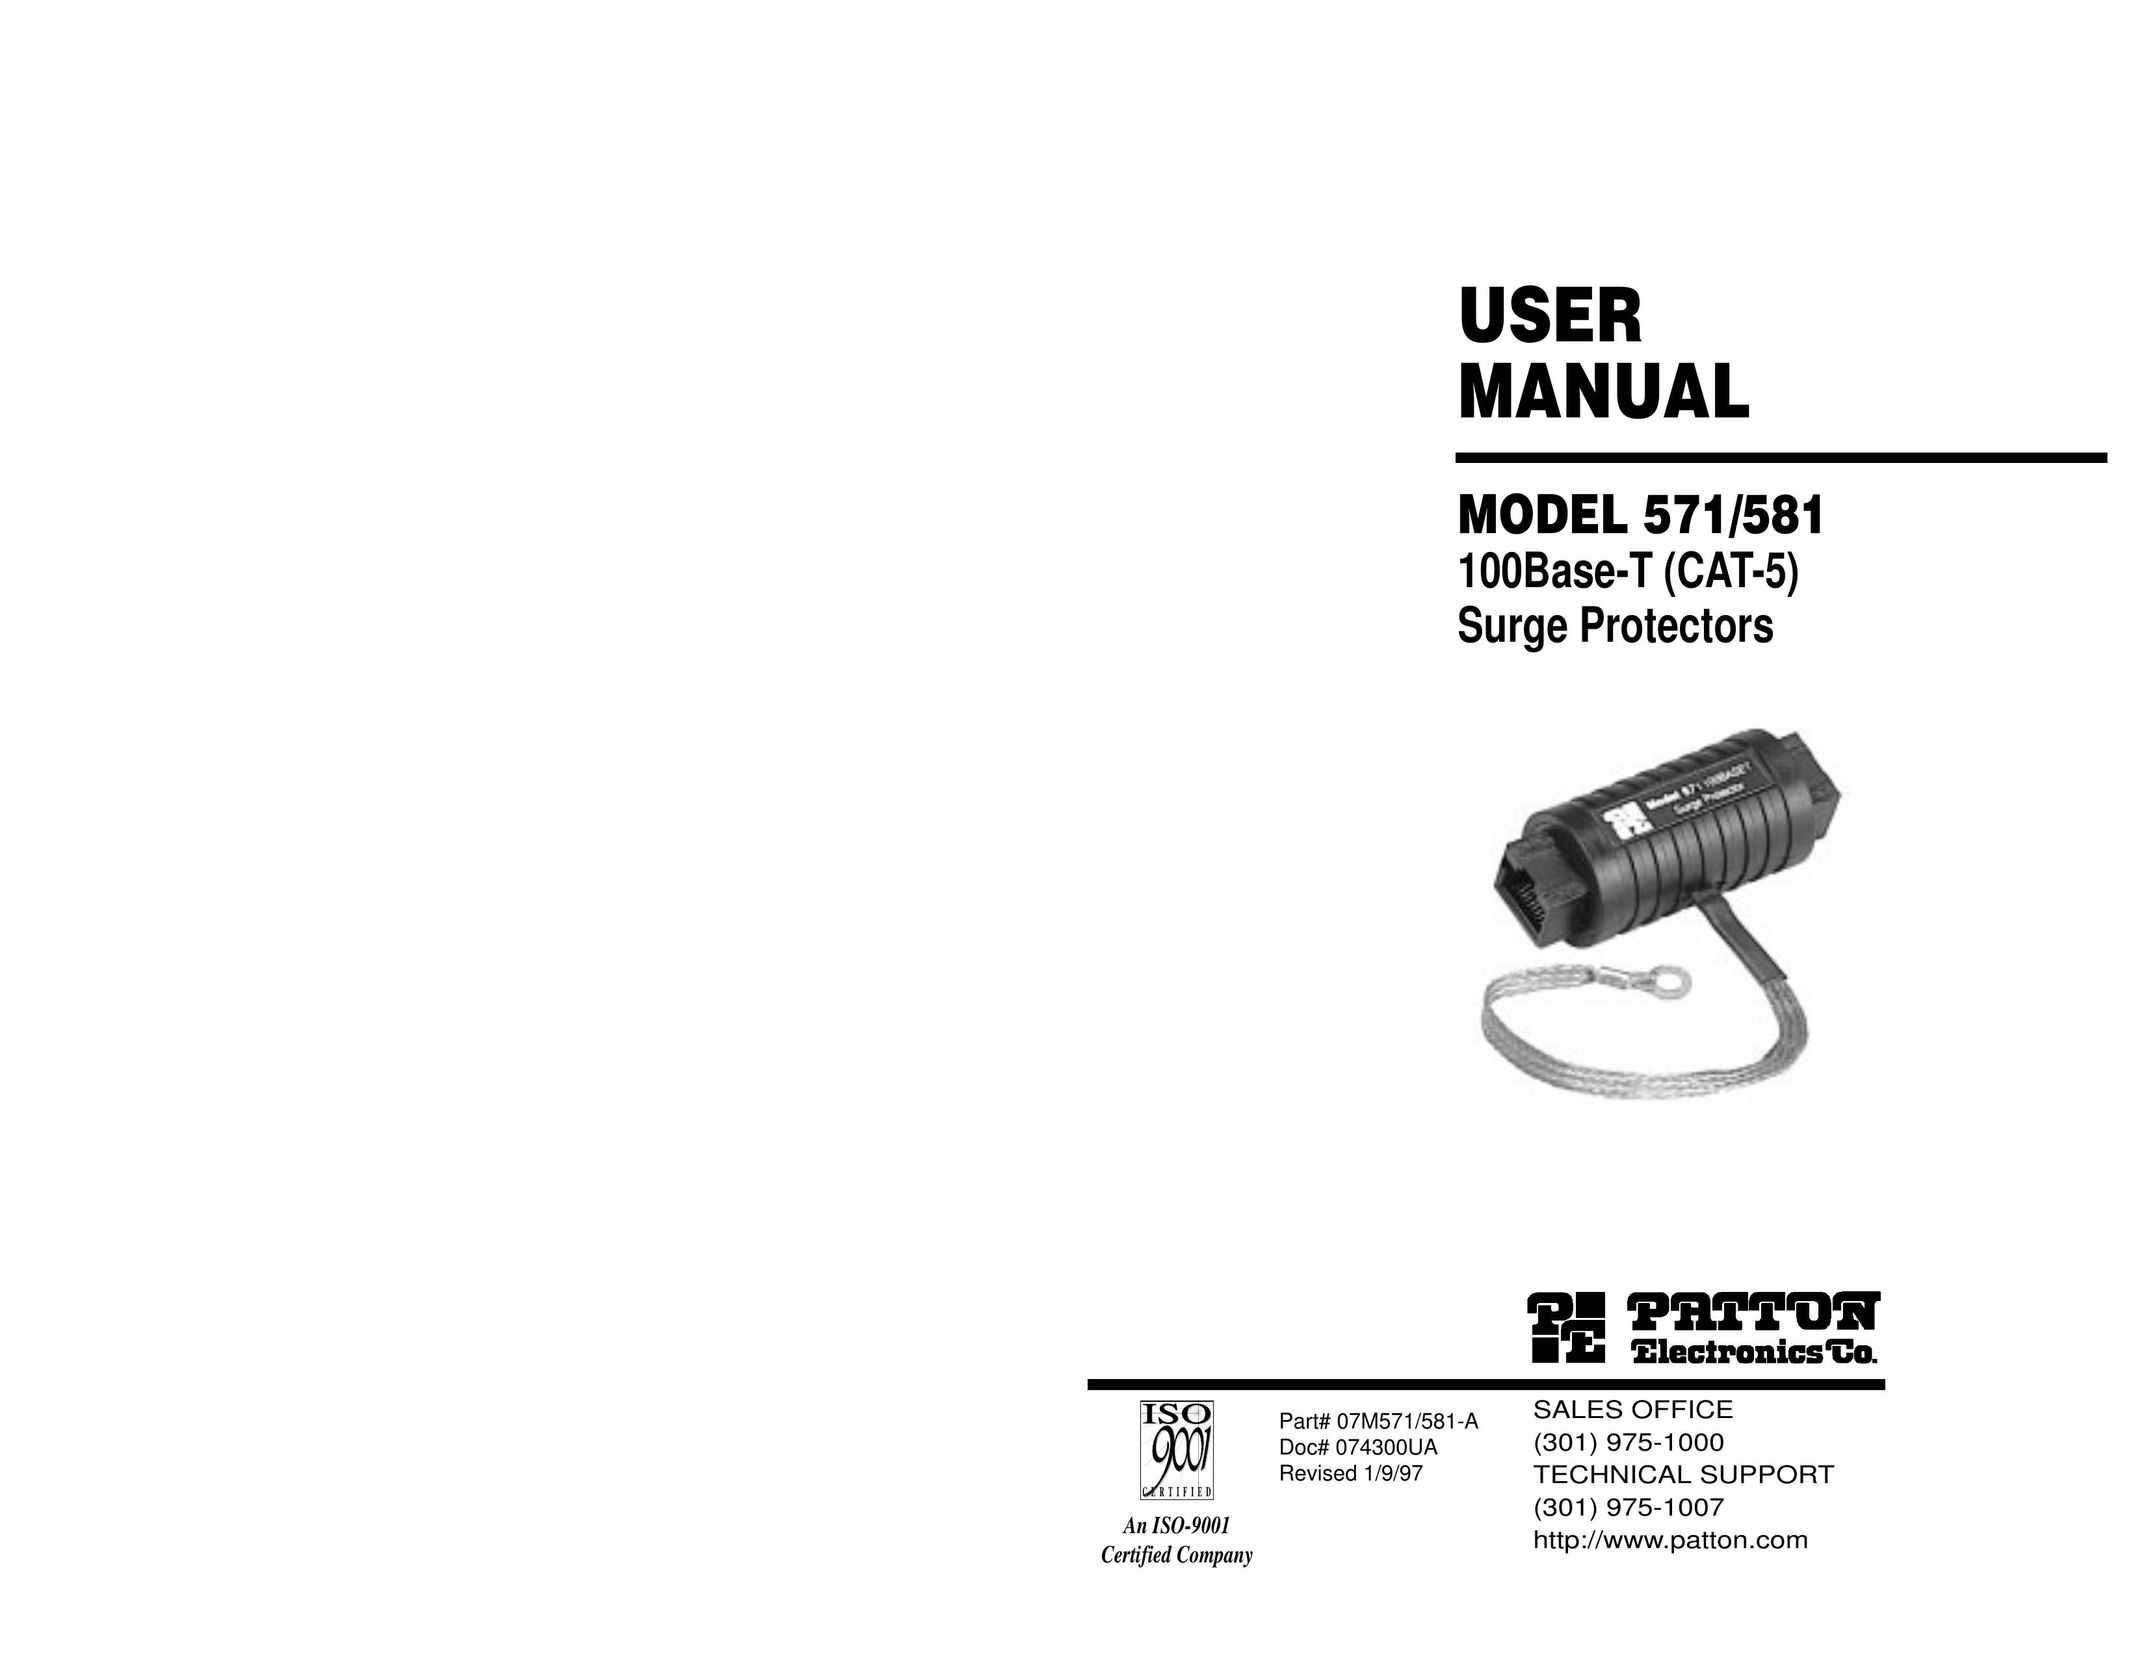 Patton electronic 581 Surge Protector User Manual